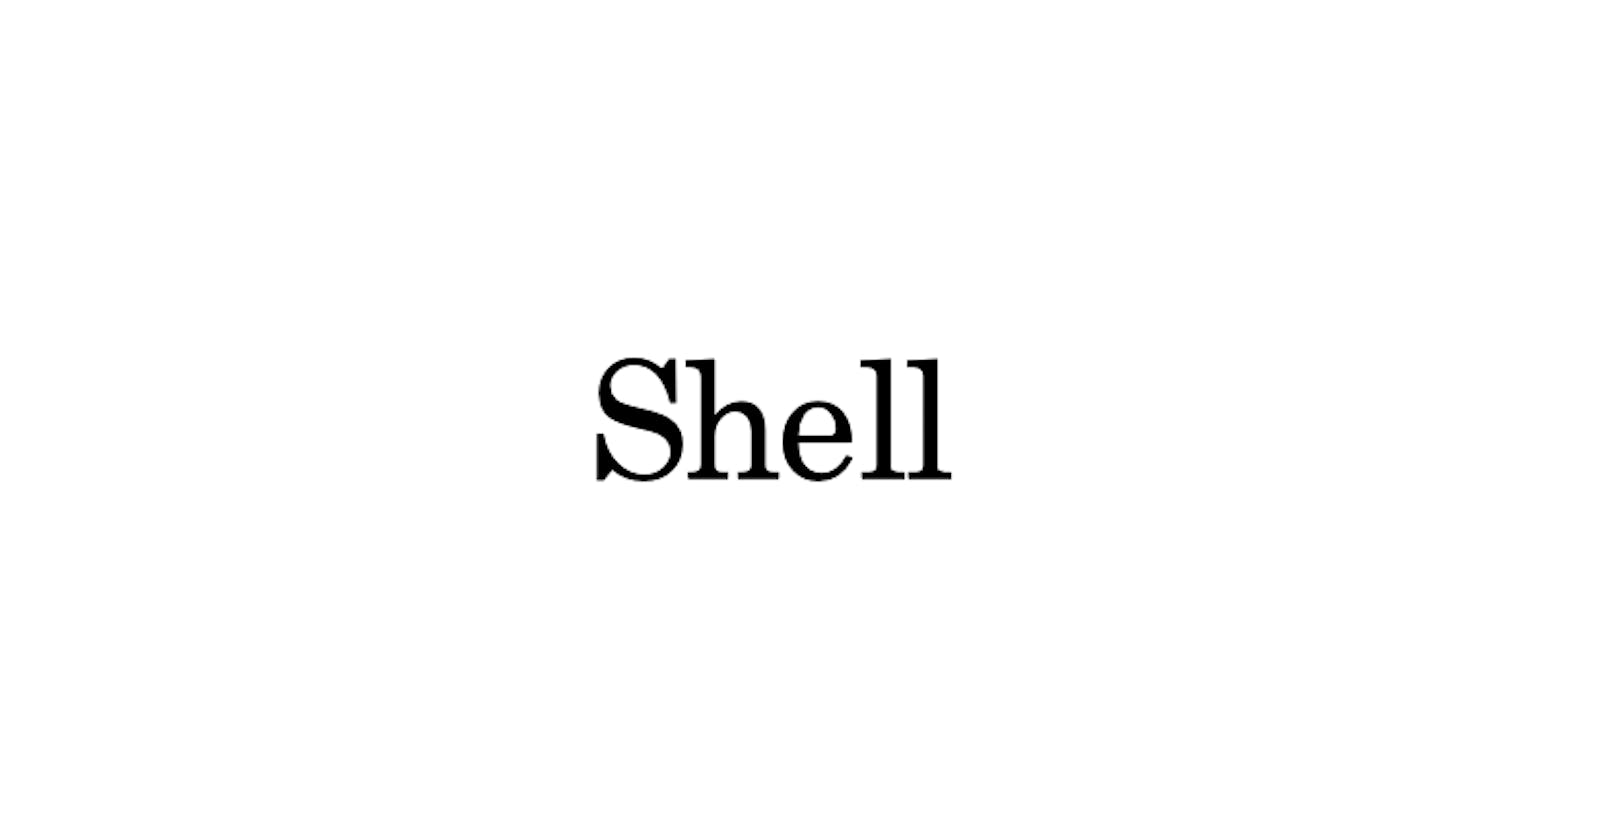 Let's get into Shell